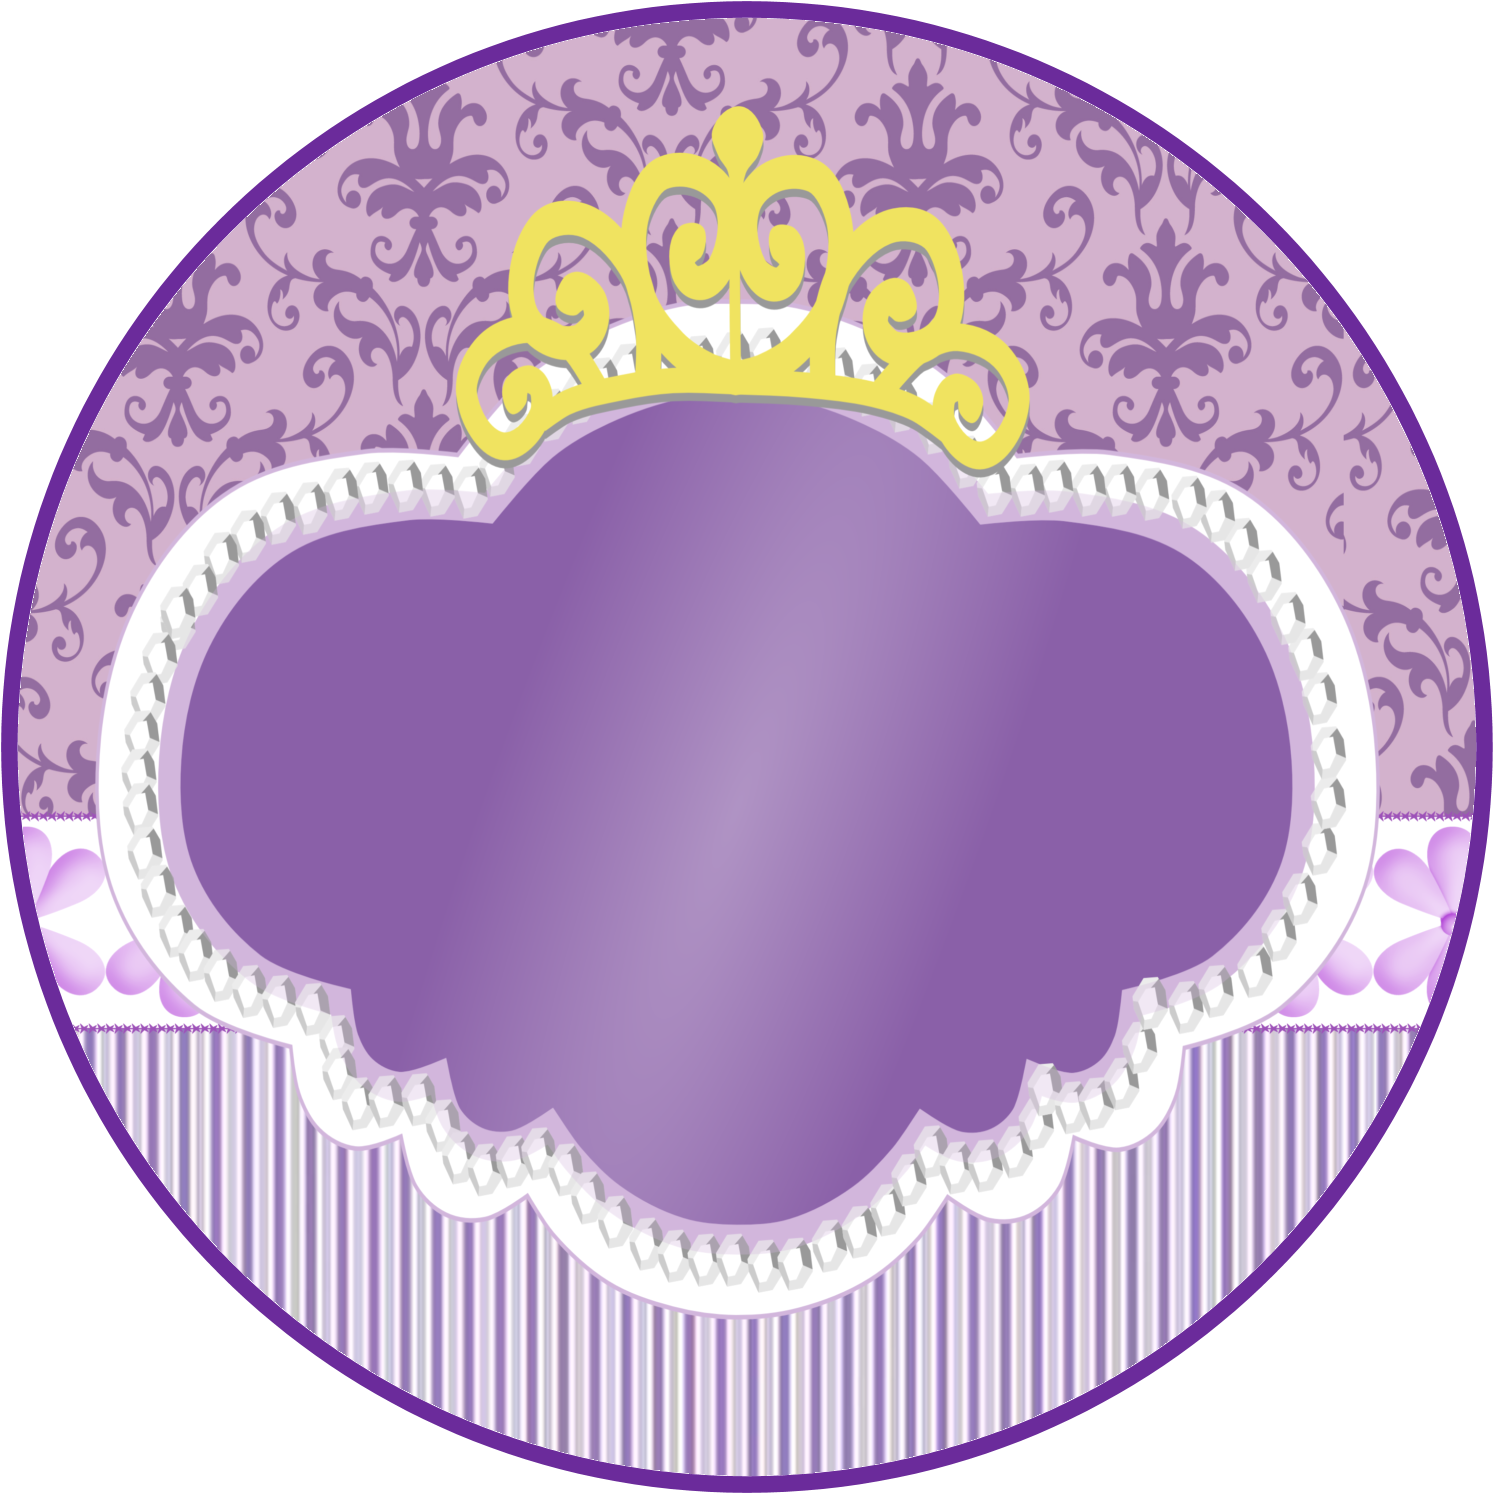 A Purple And White Circle With A Crown